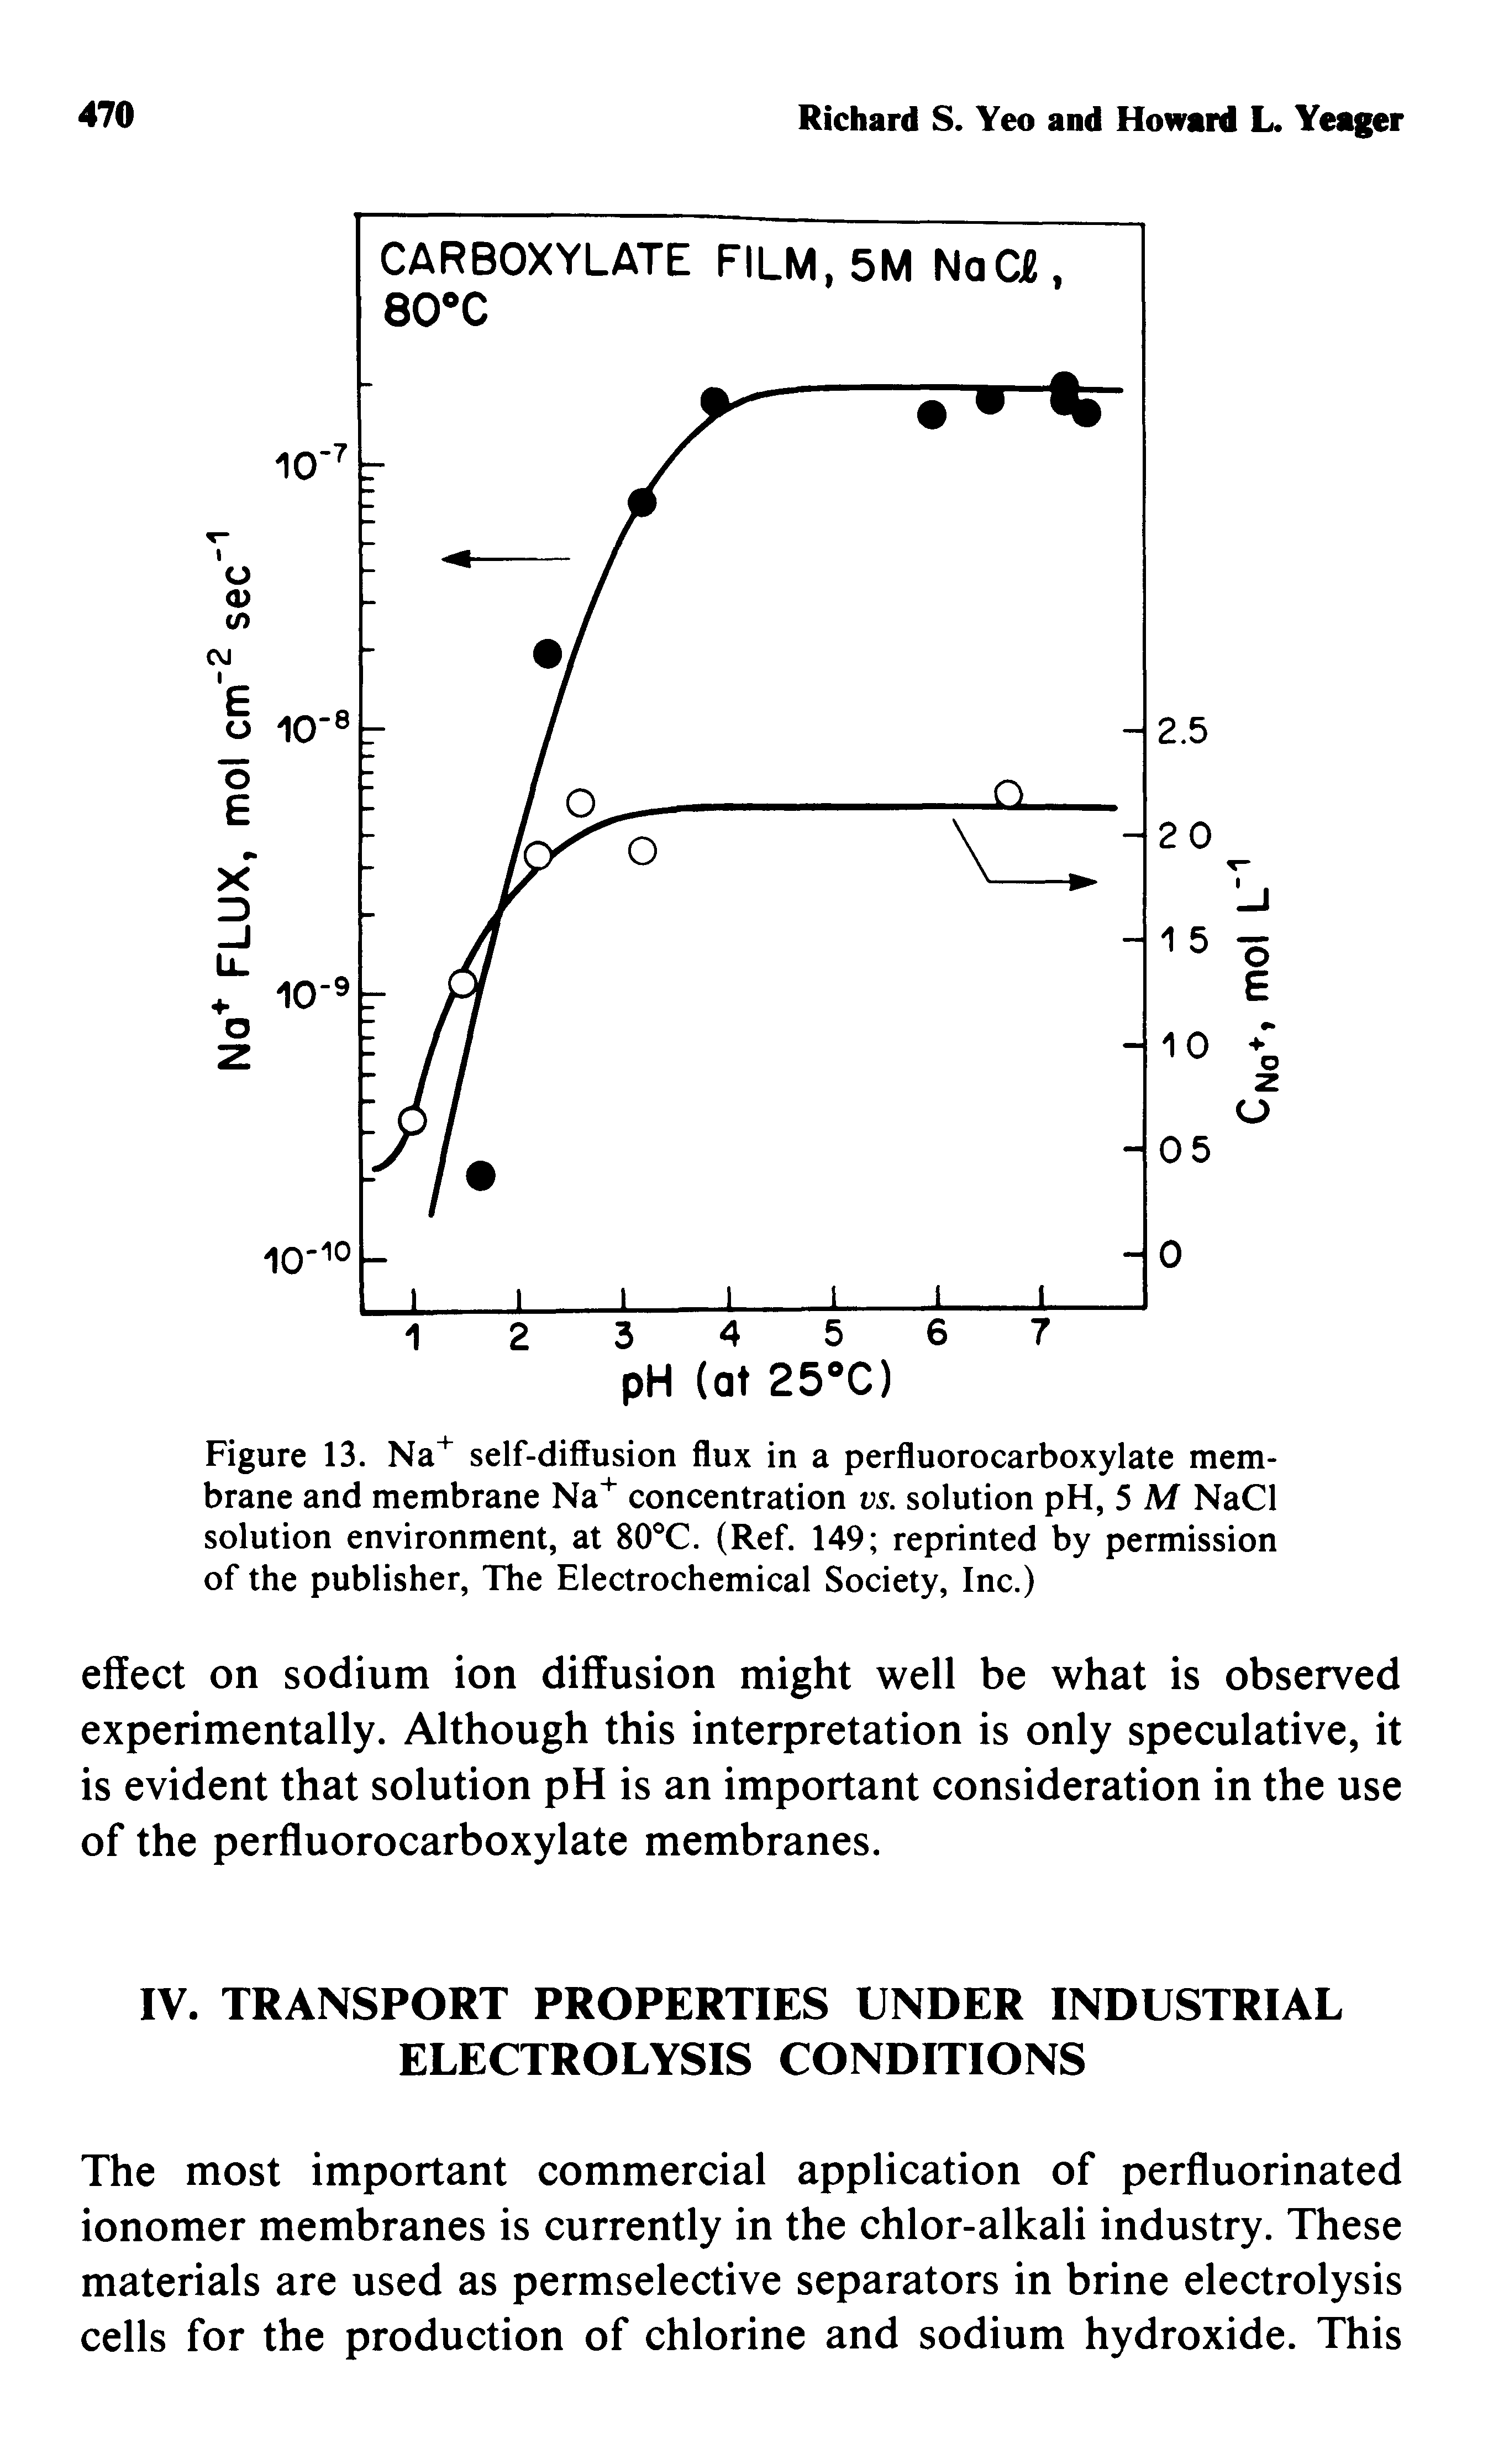 Figure 13. Na self-diffusion flux in a perfluorocarboxylate membrane and membrane Na concentration vs. solution pH, 5 M NaCl solution environment, at 80°C. (Ref. 149 reprinted by permission of the publisher. The Electrochemical Society, Inc.)...